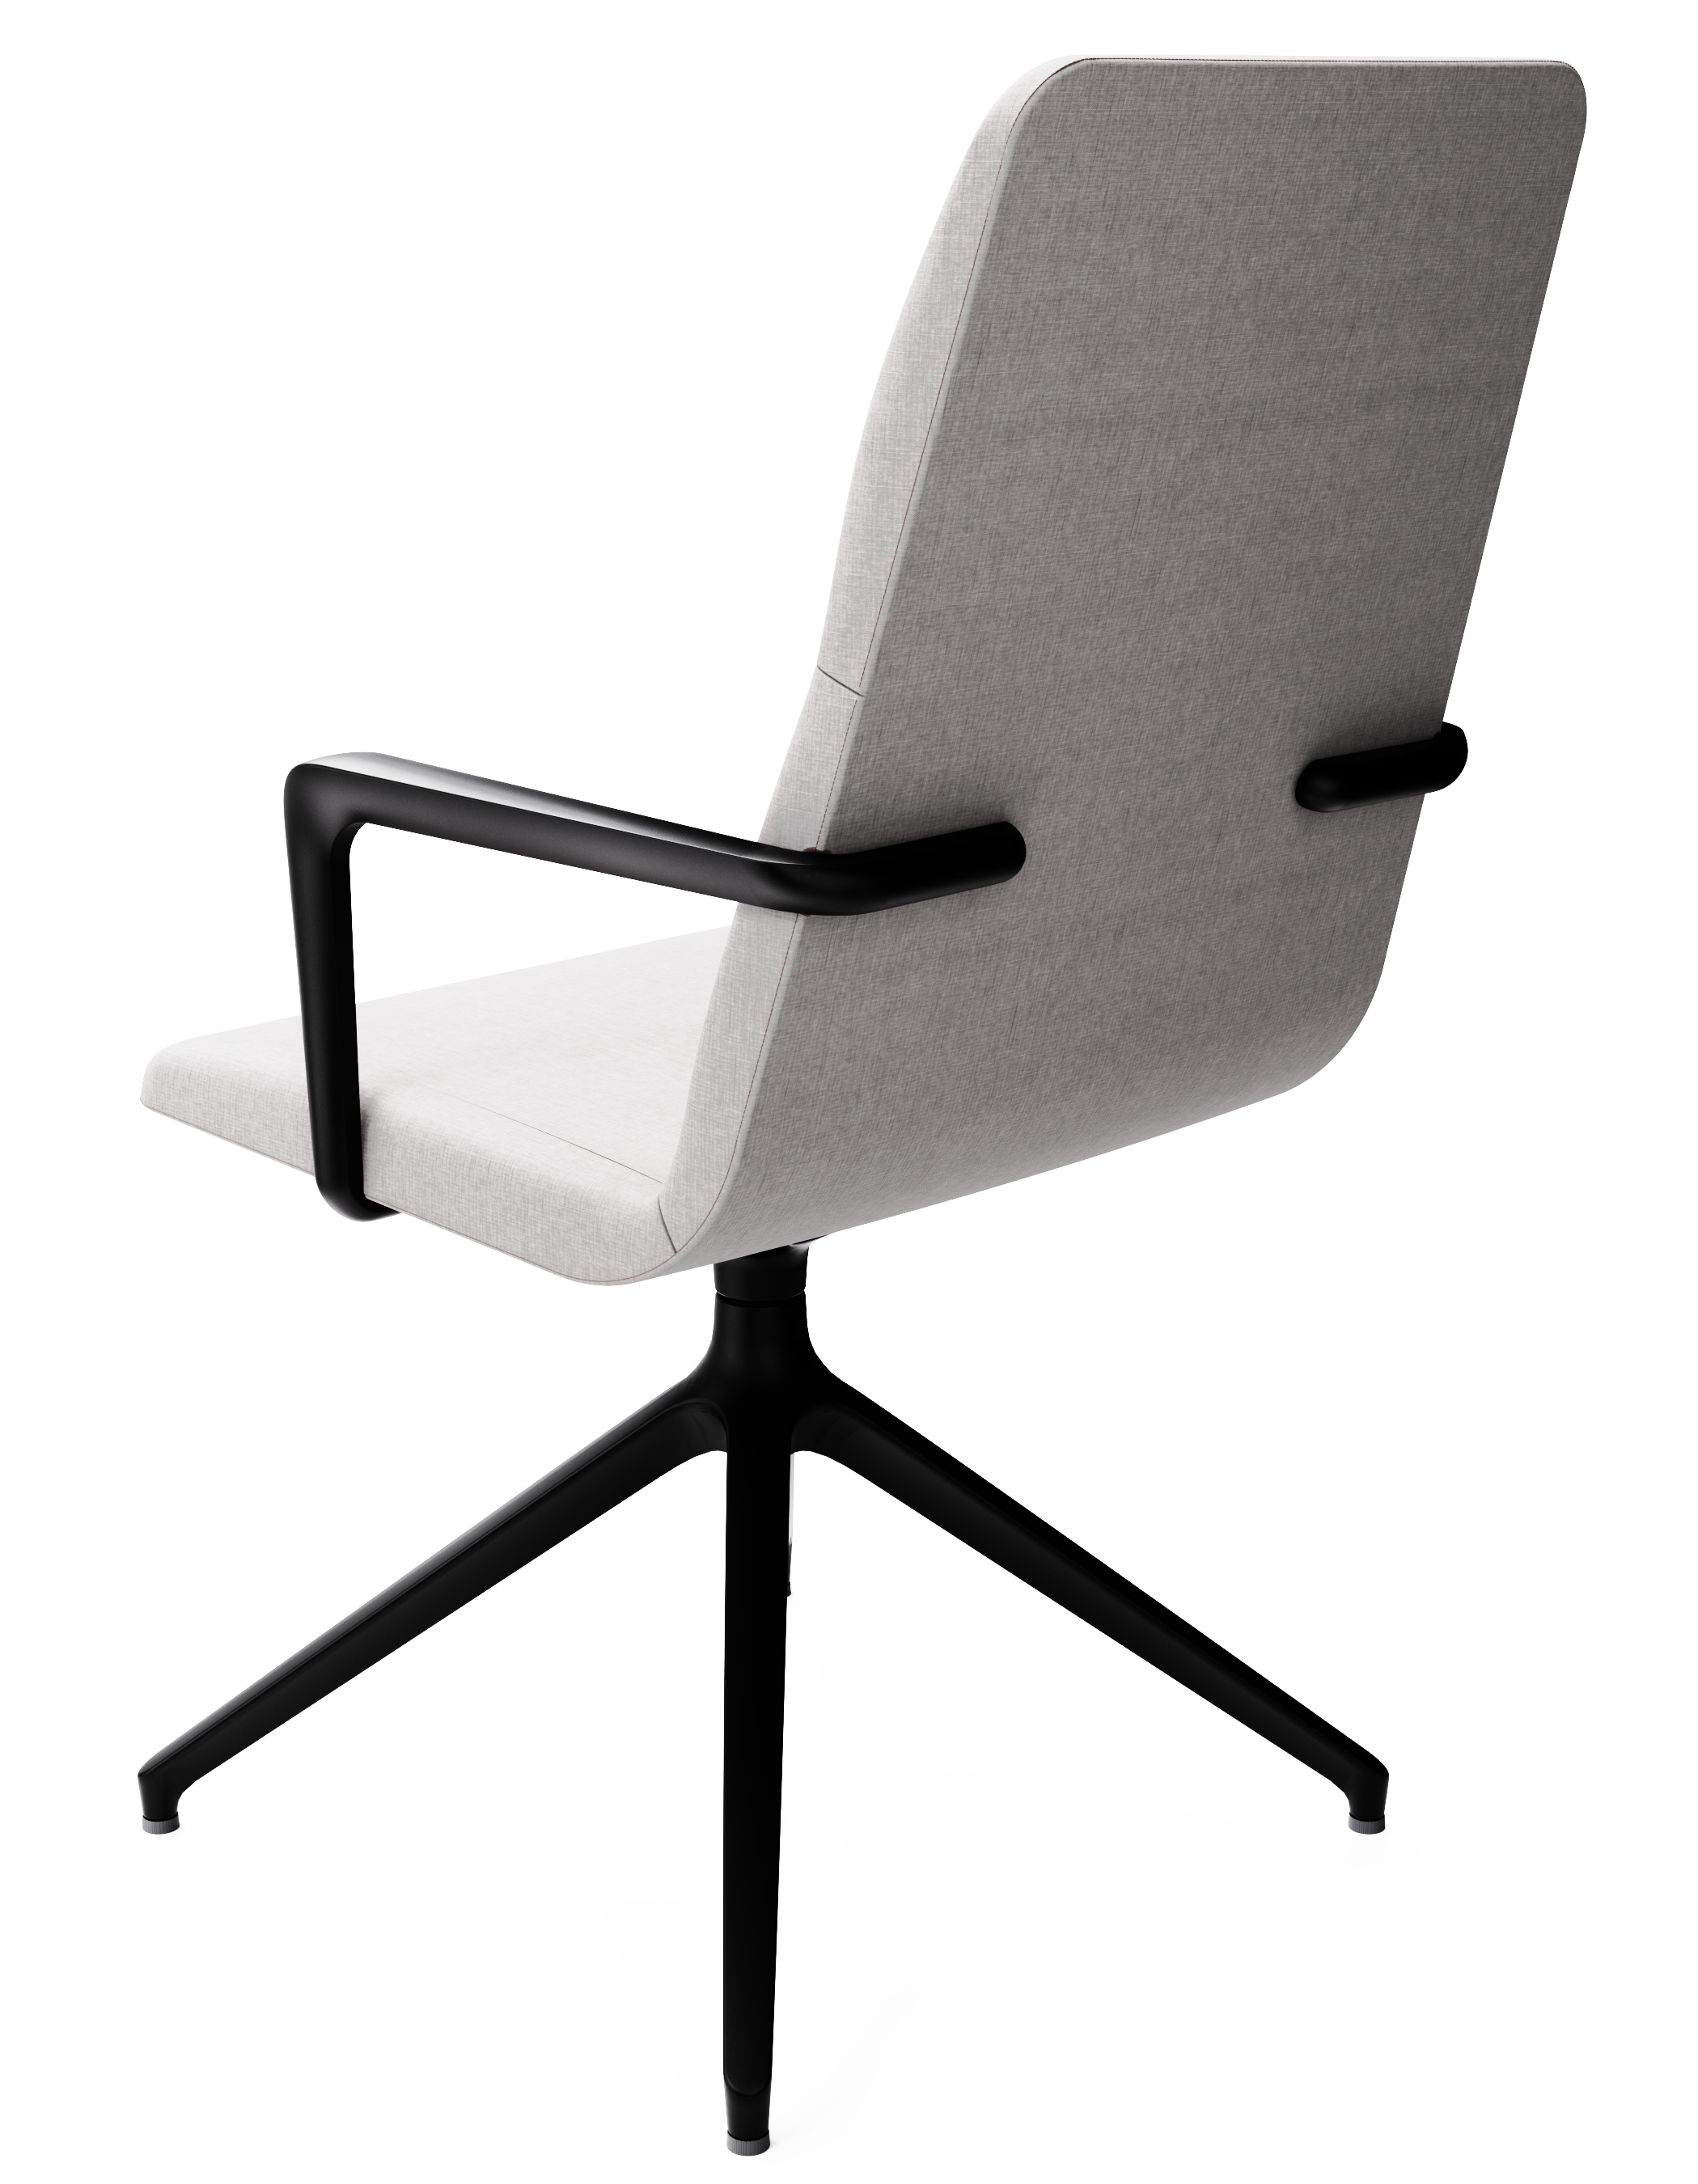 WS - Accord with arms 4 star pyramid base chair - black - remix 126 - back angle